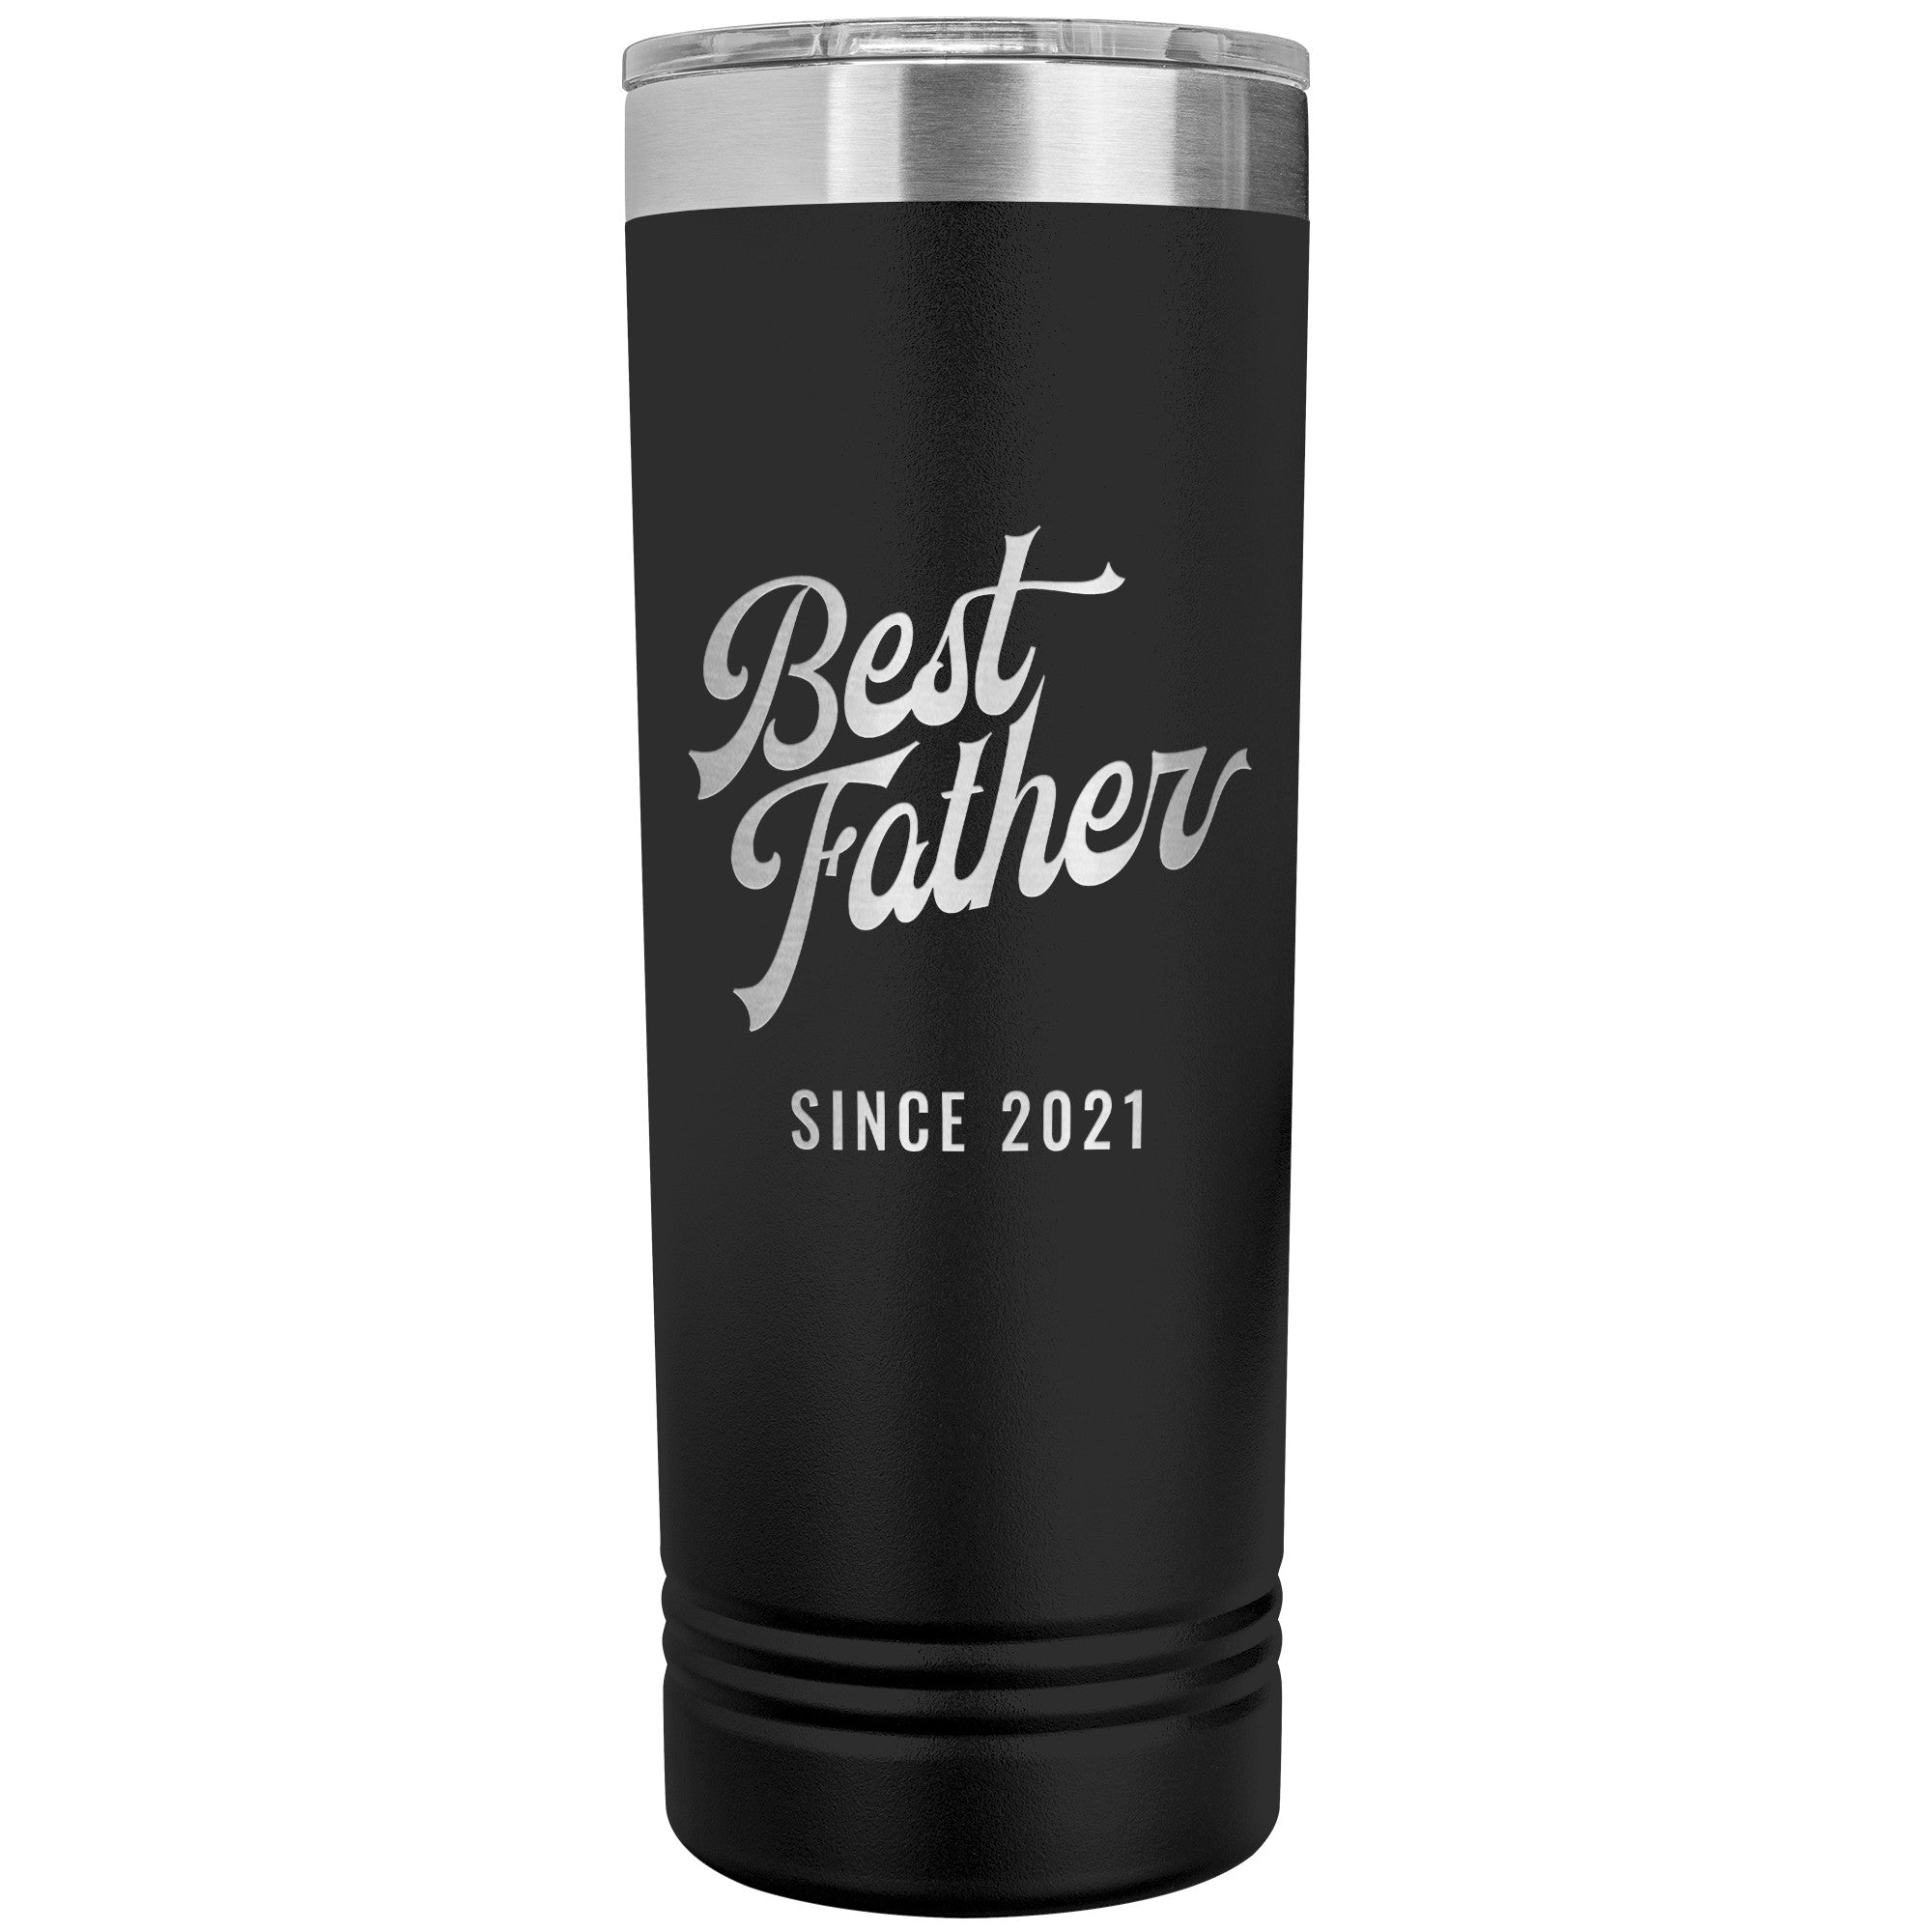 Best Father Since 2021 - 22oz Insulated Skinny Tumbler